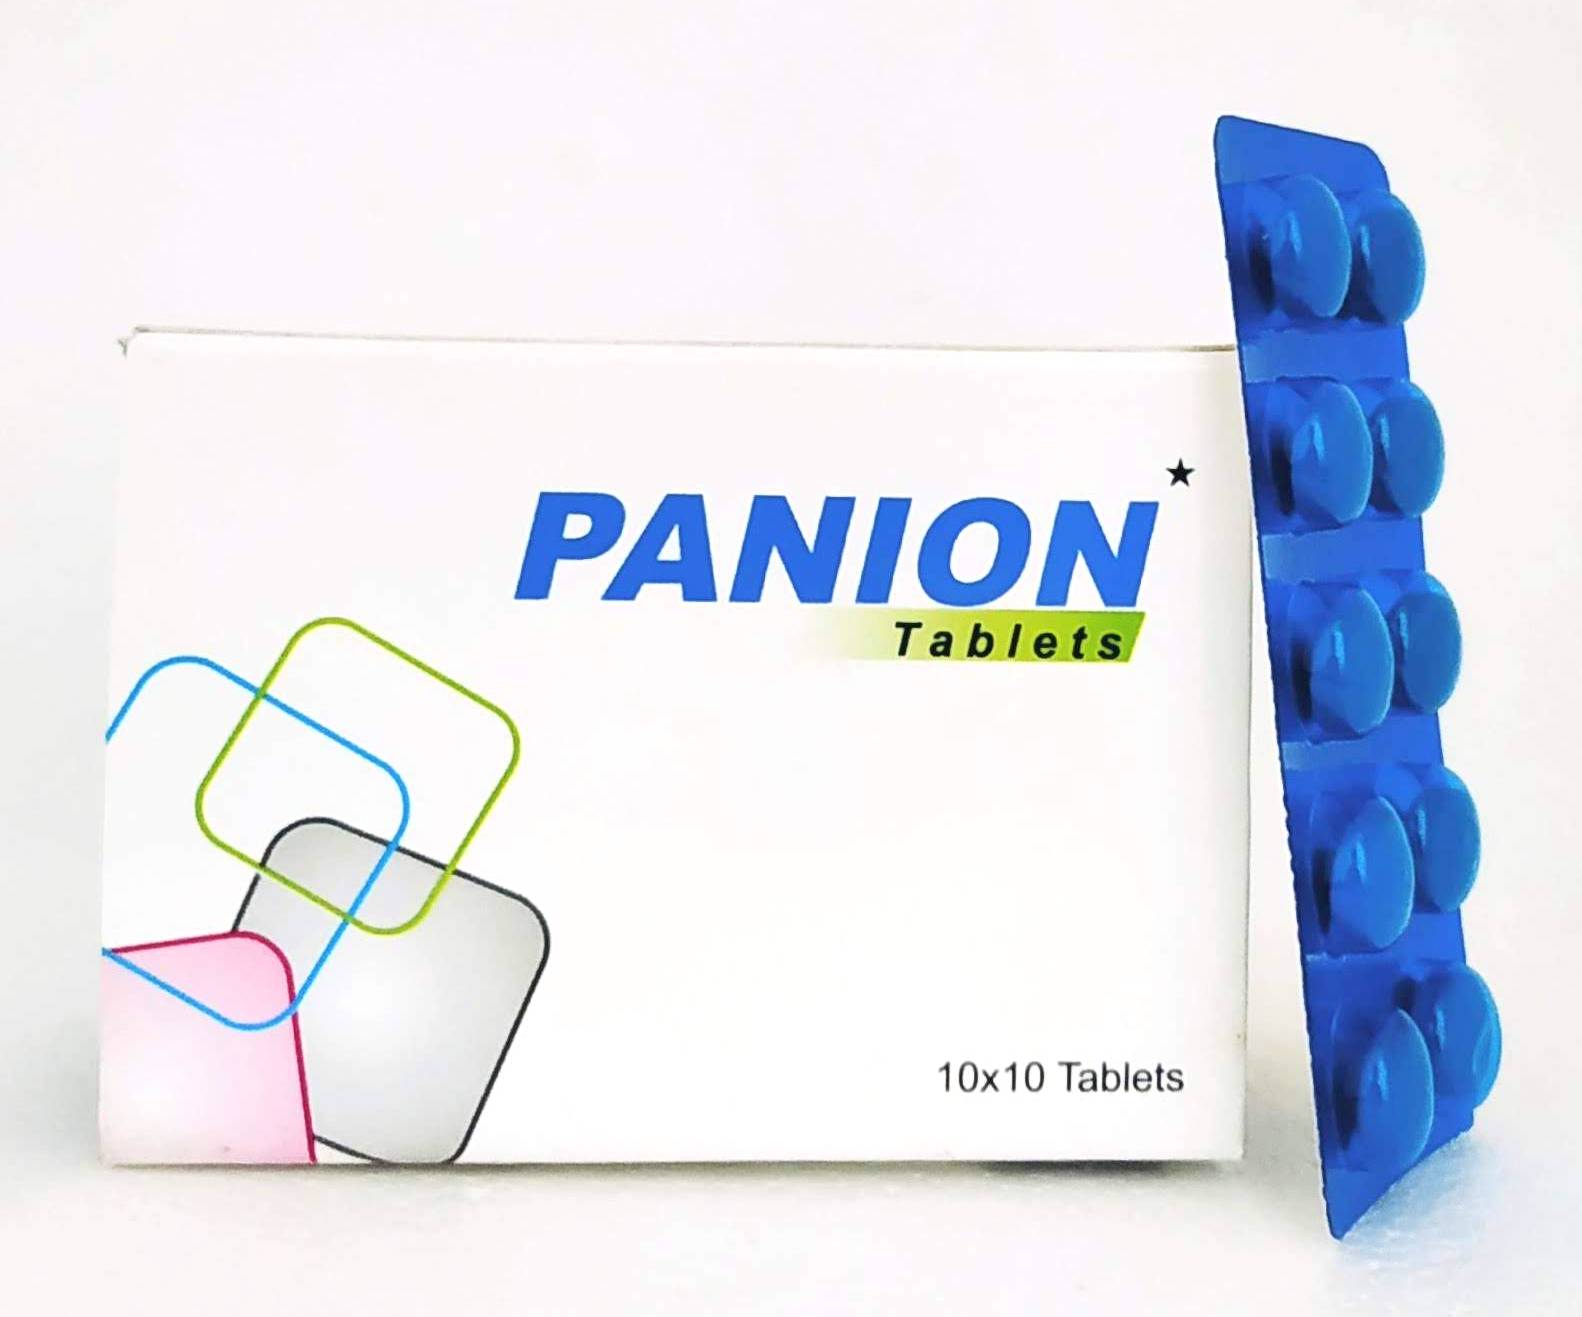 Shop Panion tablets - 10Tablets at price 35.00 from Wintrust Online - Ayush Care